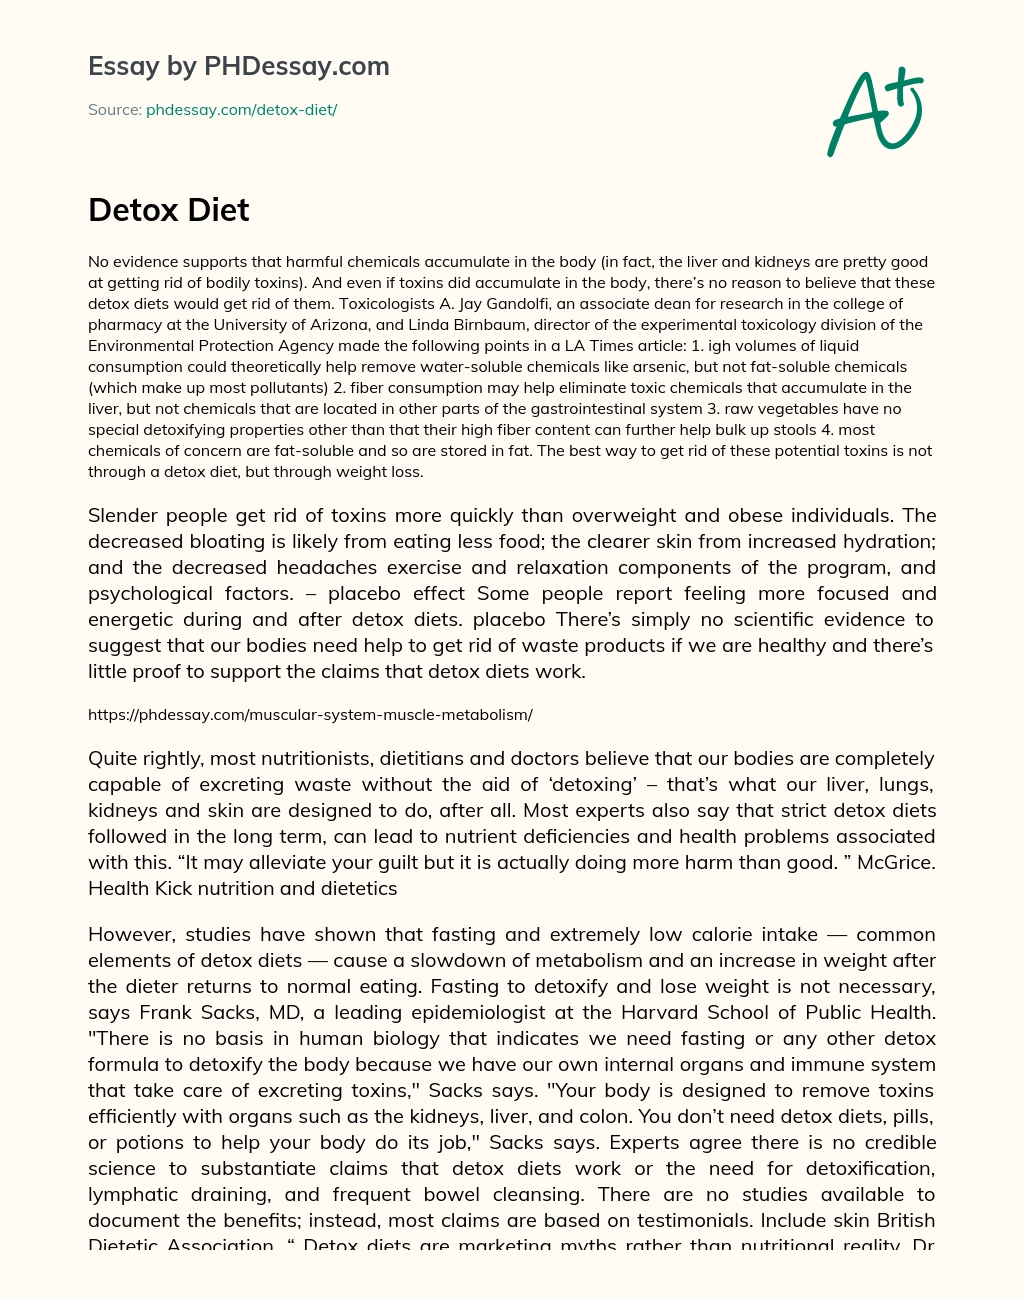 Debunking Detox Diets: Harmful Chemicals Do Not Accumulate in the Body essay